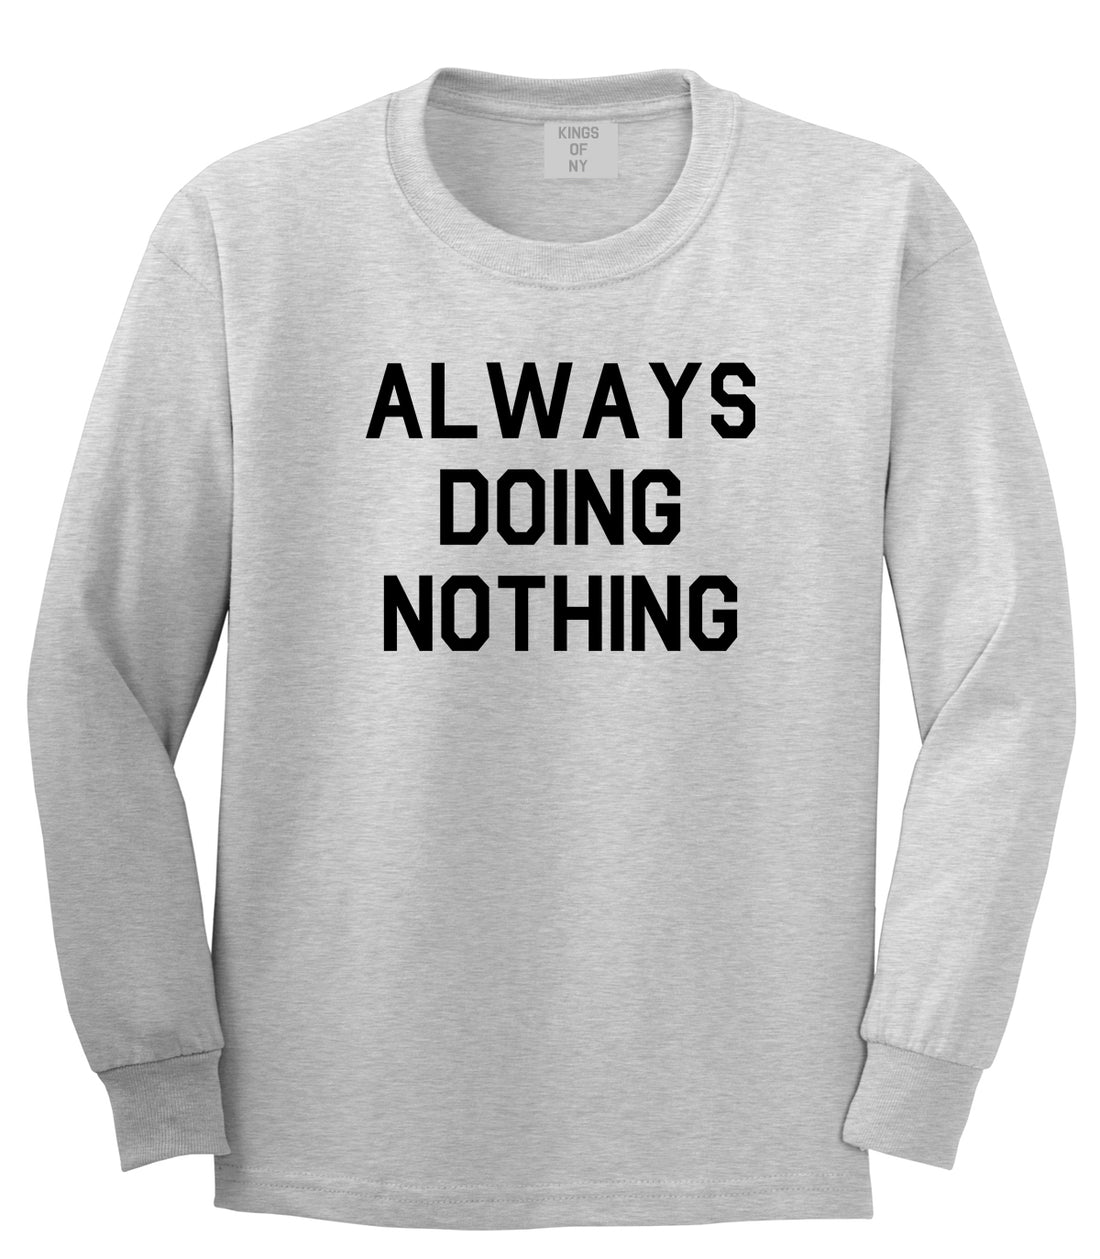 Always Doing Nothing Mens Grey Long Sleeve T-Shirt by Kings Of NY